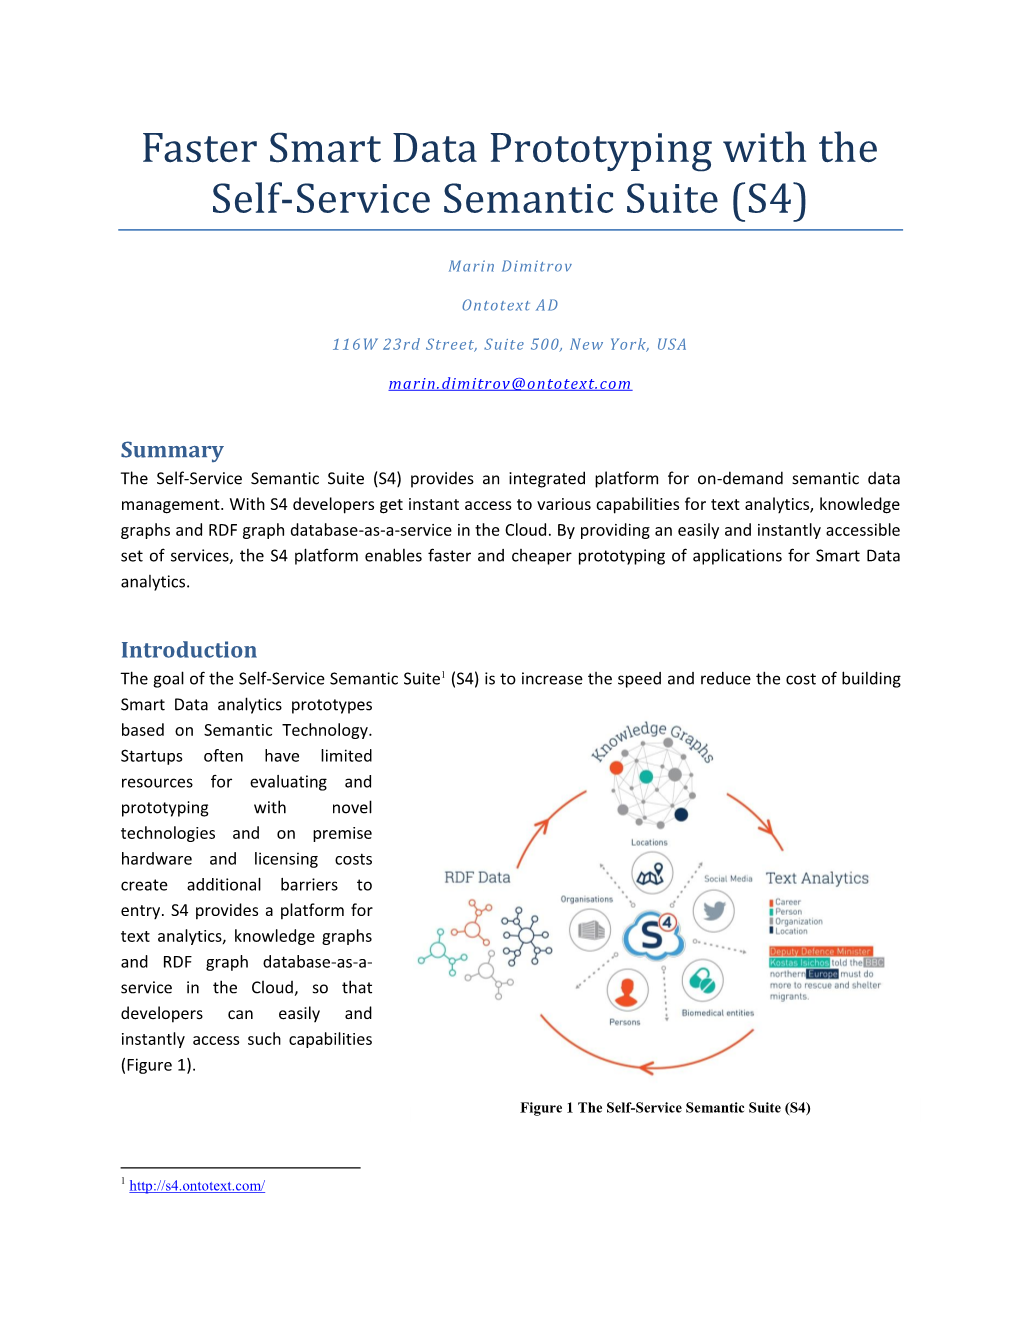 Faster Smart Data Prototyping with the Self-Service Semantic Suite (S4)